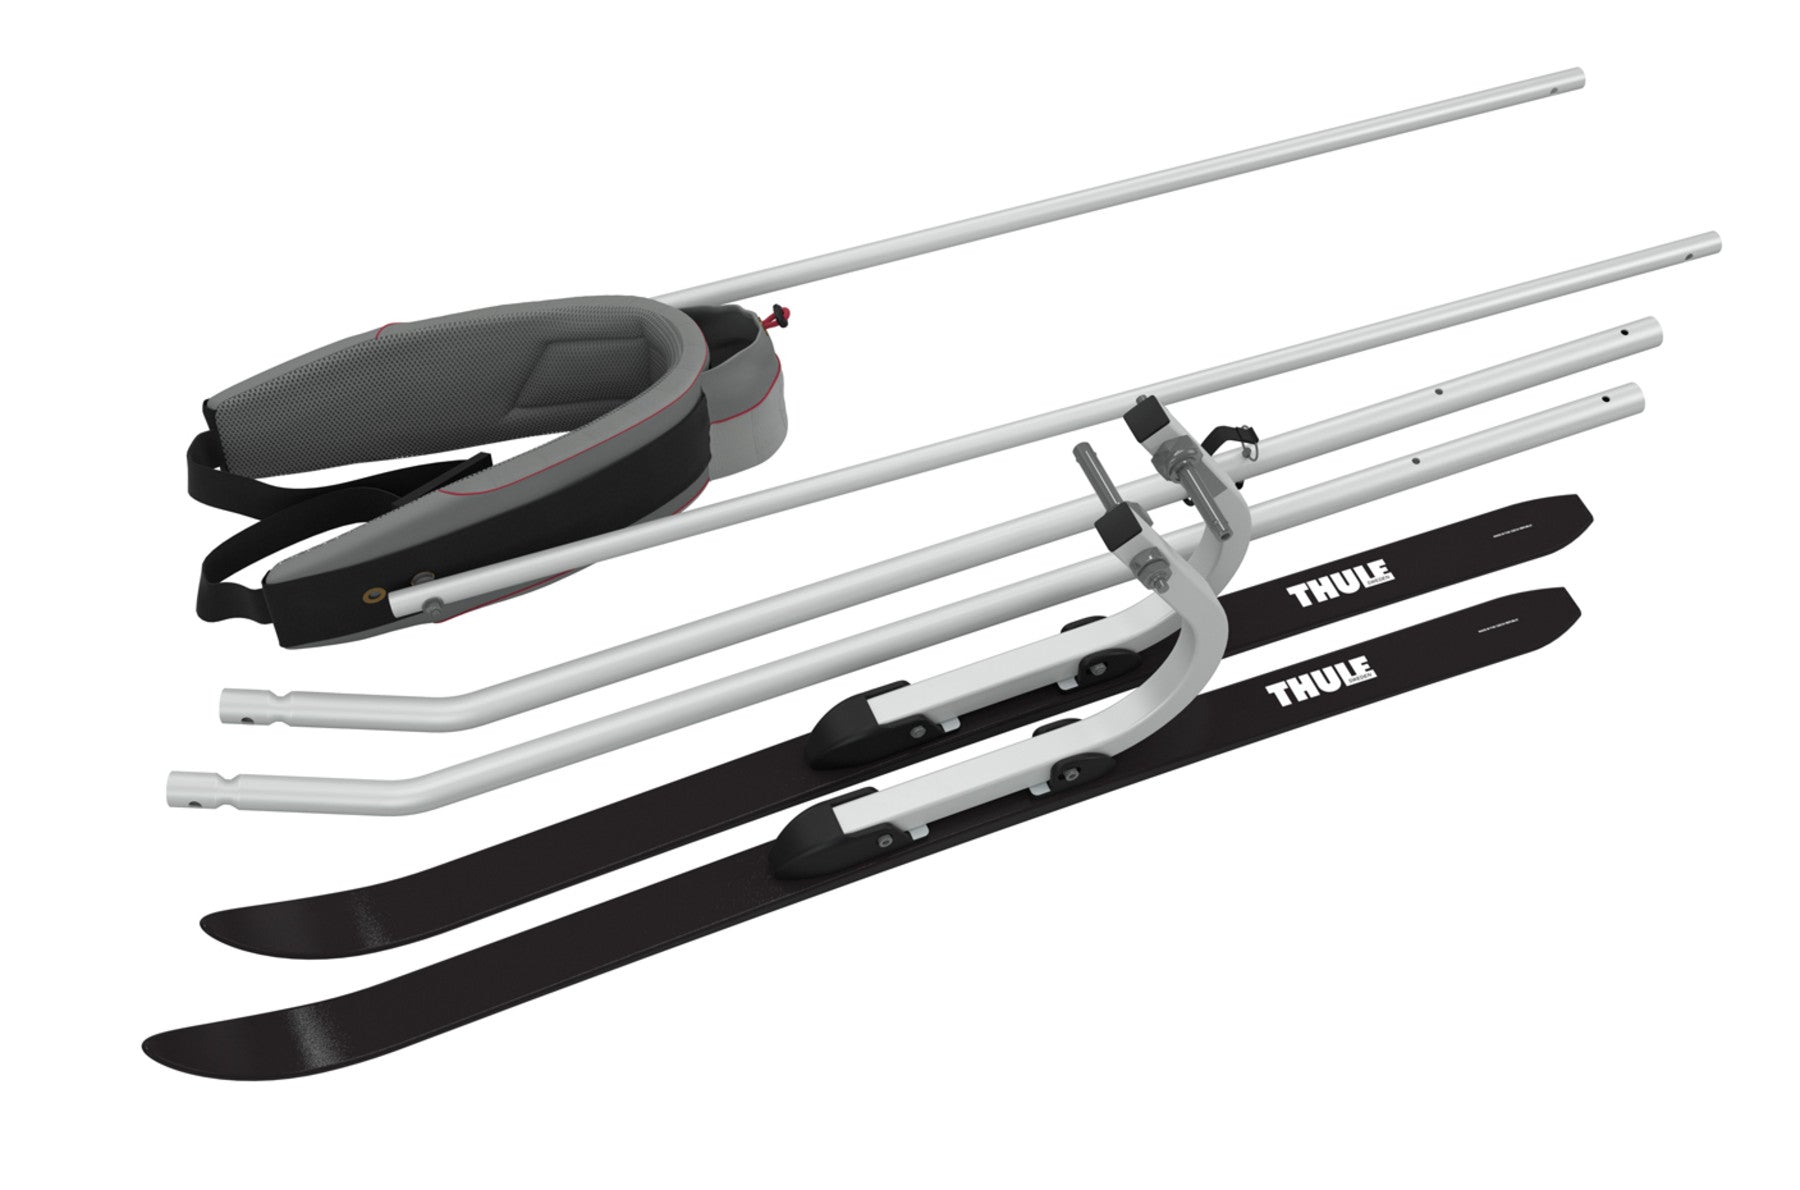 THULE Chariot Cross-Country Skiing Kit - ANB Baby -Thule